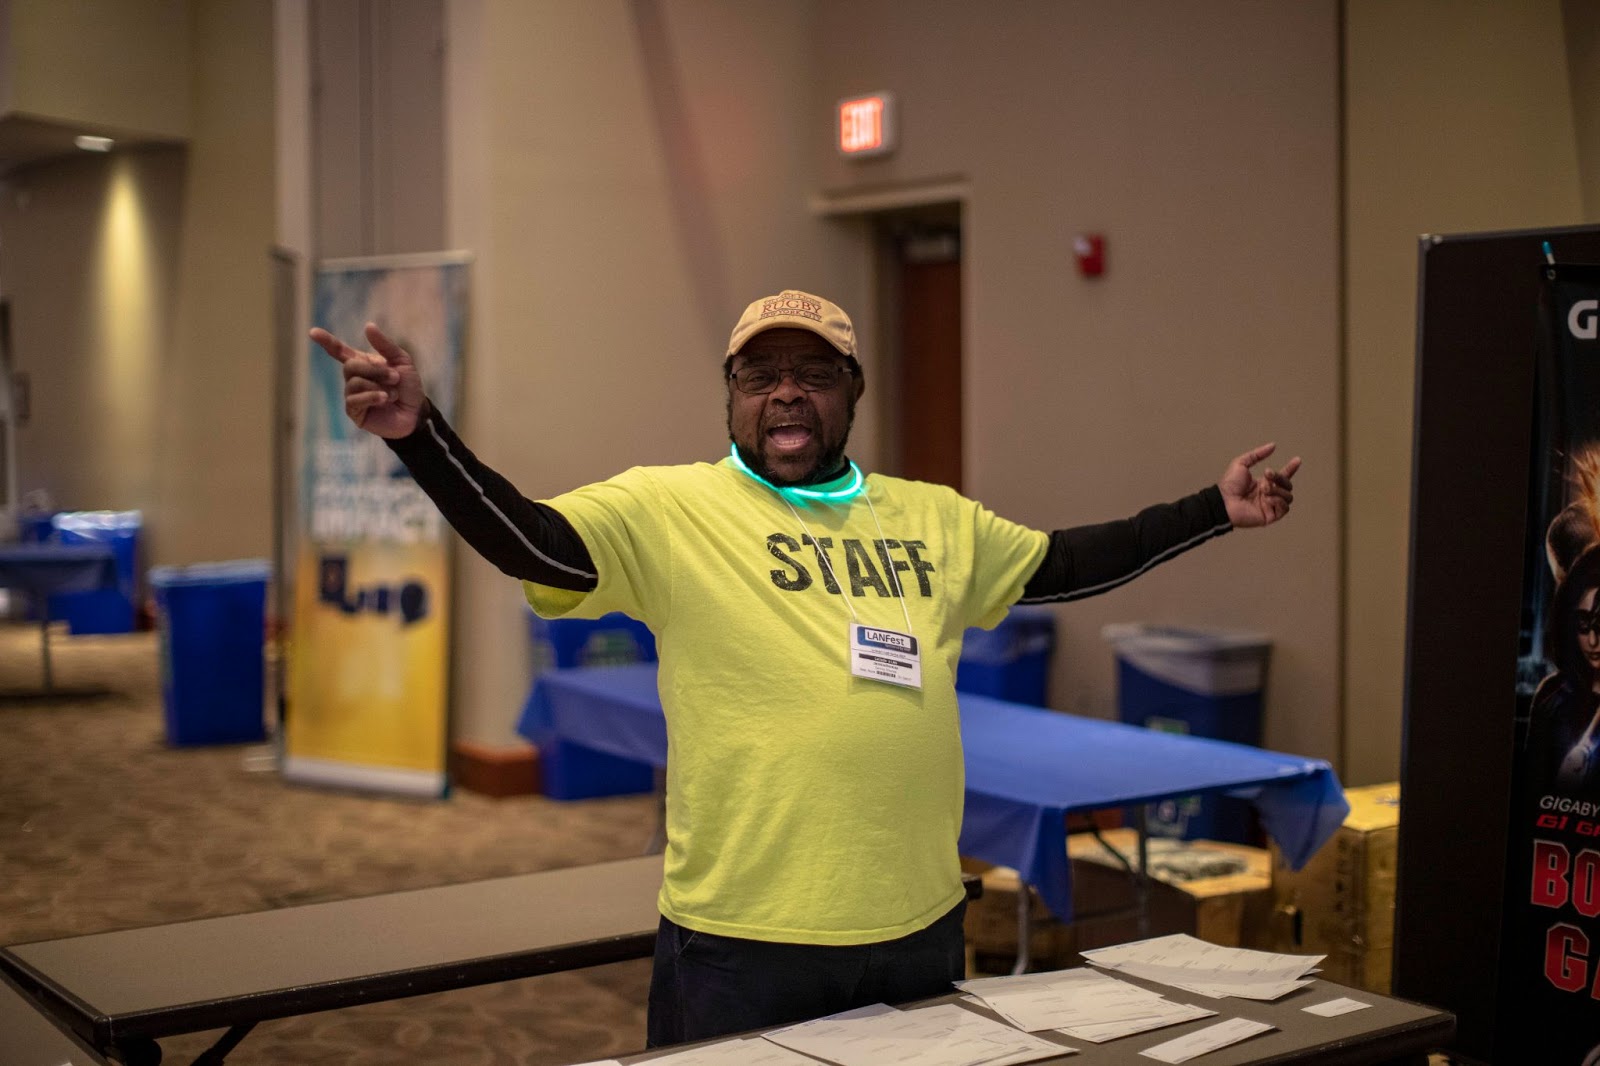 LANFest hosts 20+ annual events with dedicated local volunteers. Count on us for expert staff support at your event!